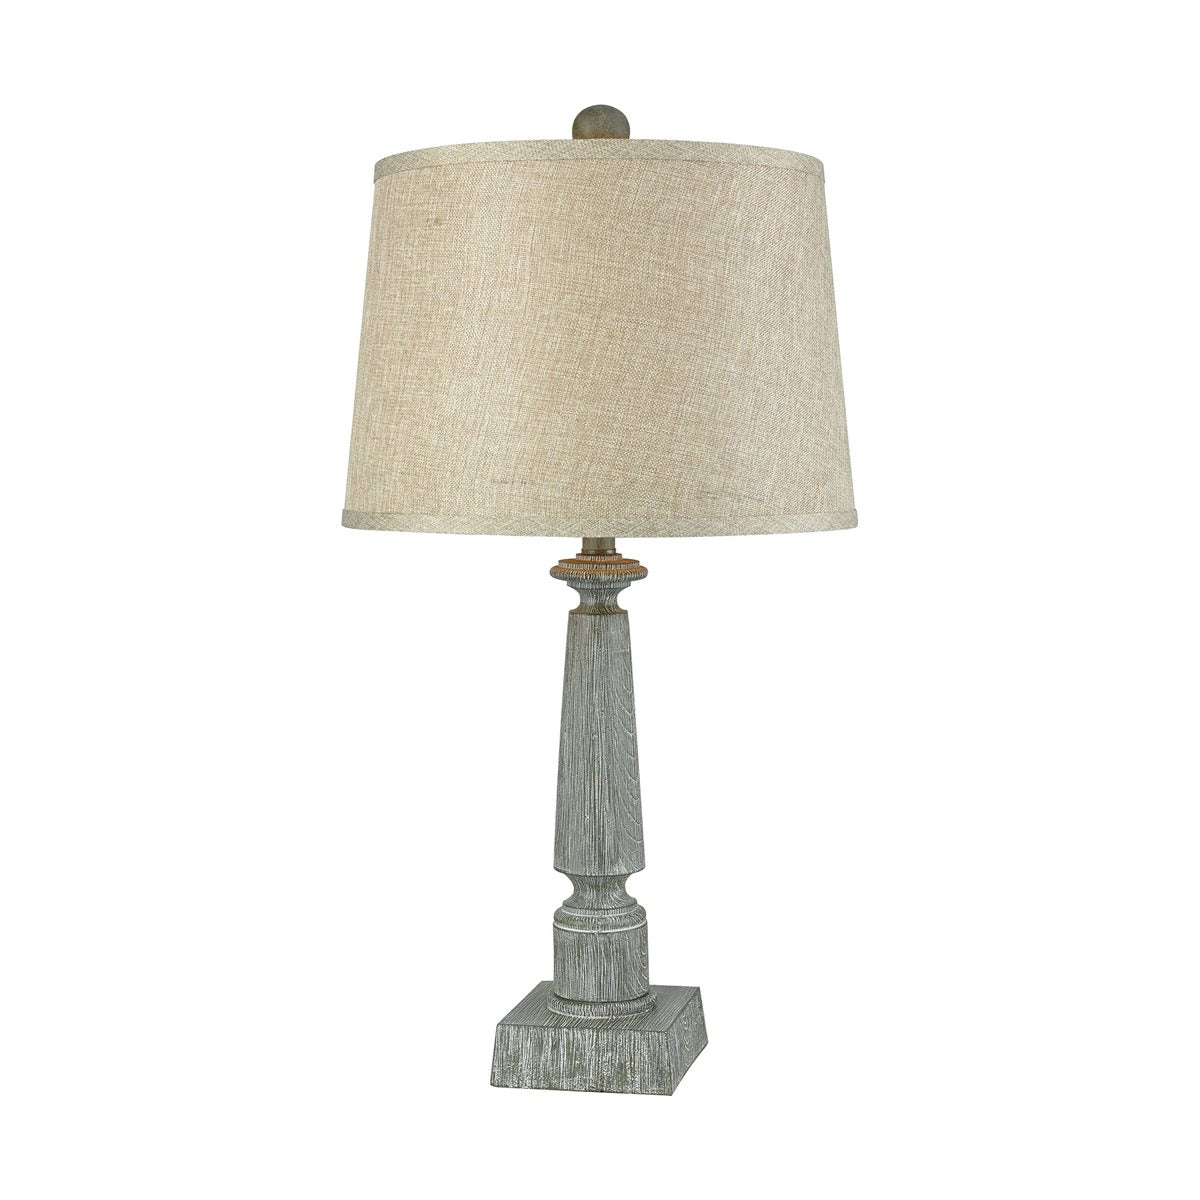 Stein World Trice Table Lamp Grey 77014